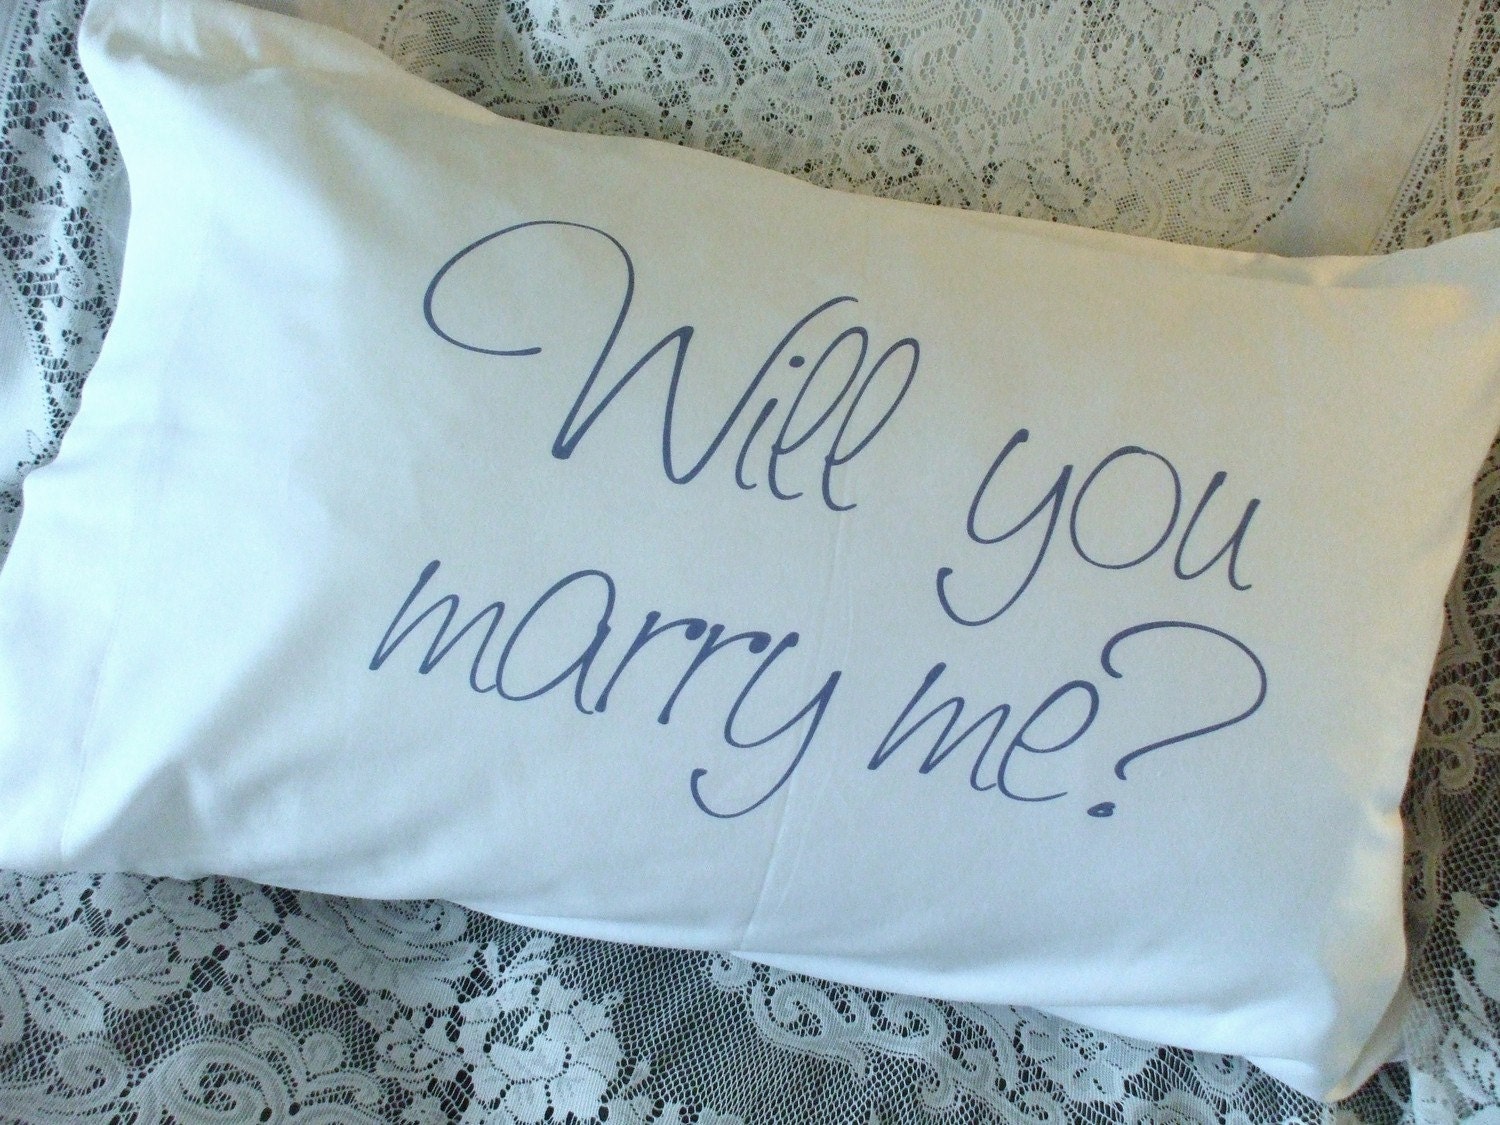 Personalized pillowcase printed with Will You Marry Me -  FREE personalization